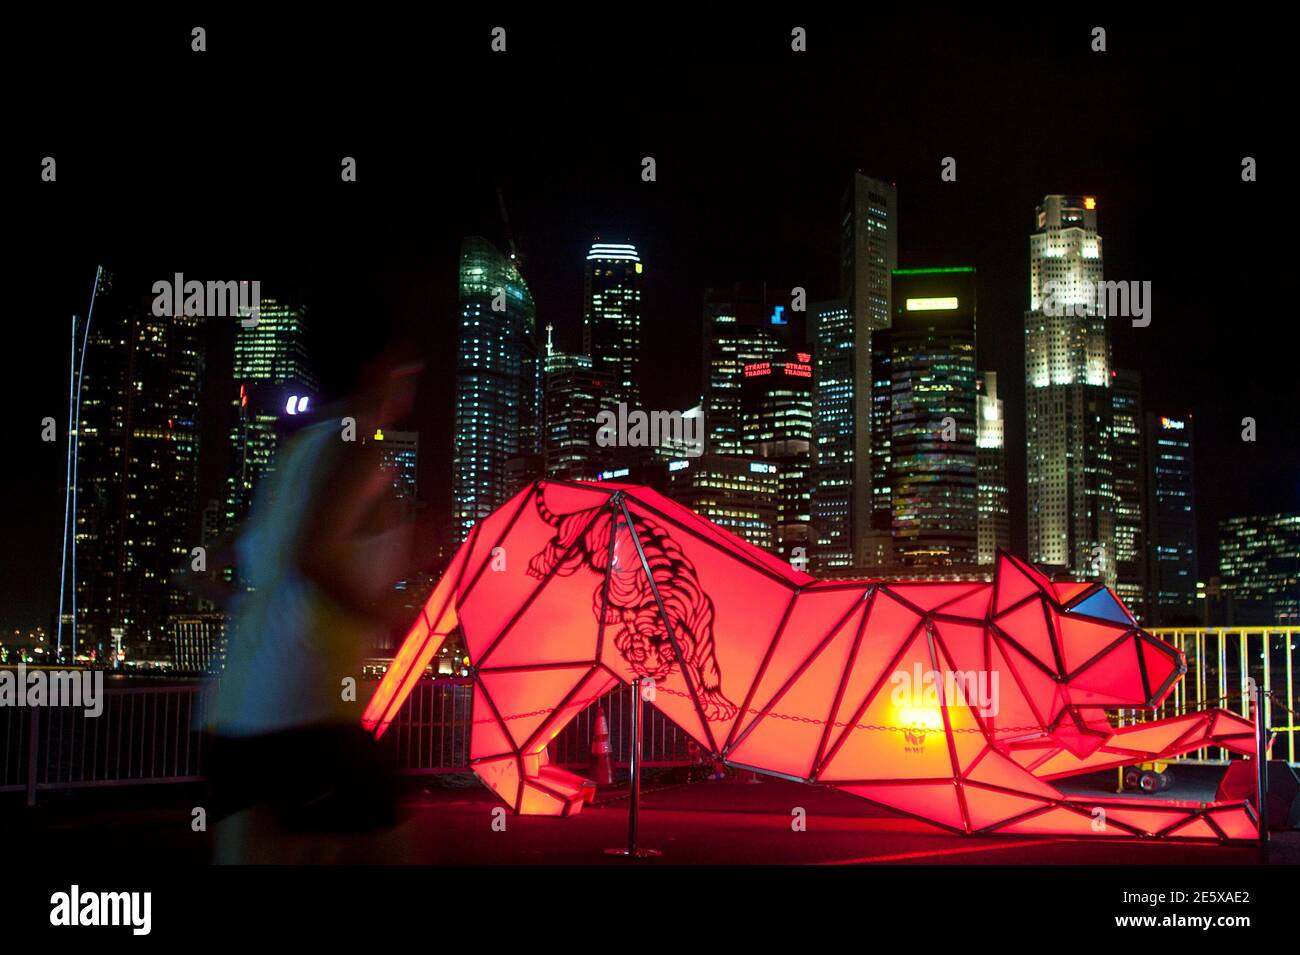 A man jogs past the artwork Digital Origami by Chris Bosse of Germany during "i Light Marina Bay" festival in Singapore November 1, 2010. The festival features 26 art installations